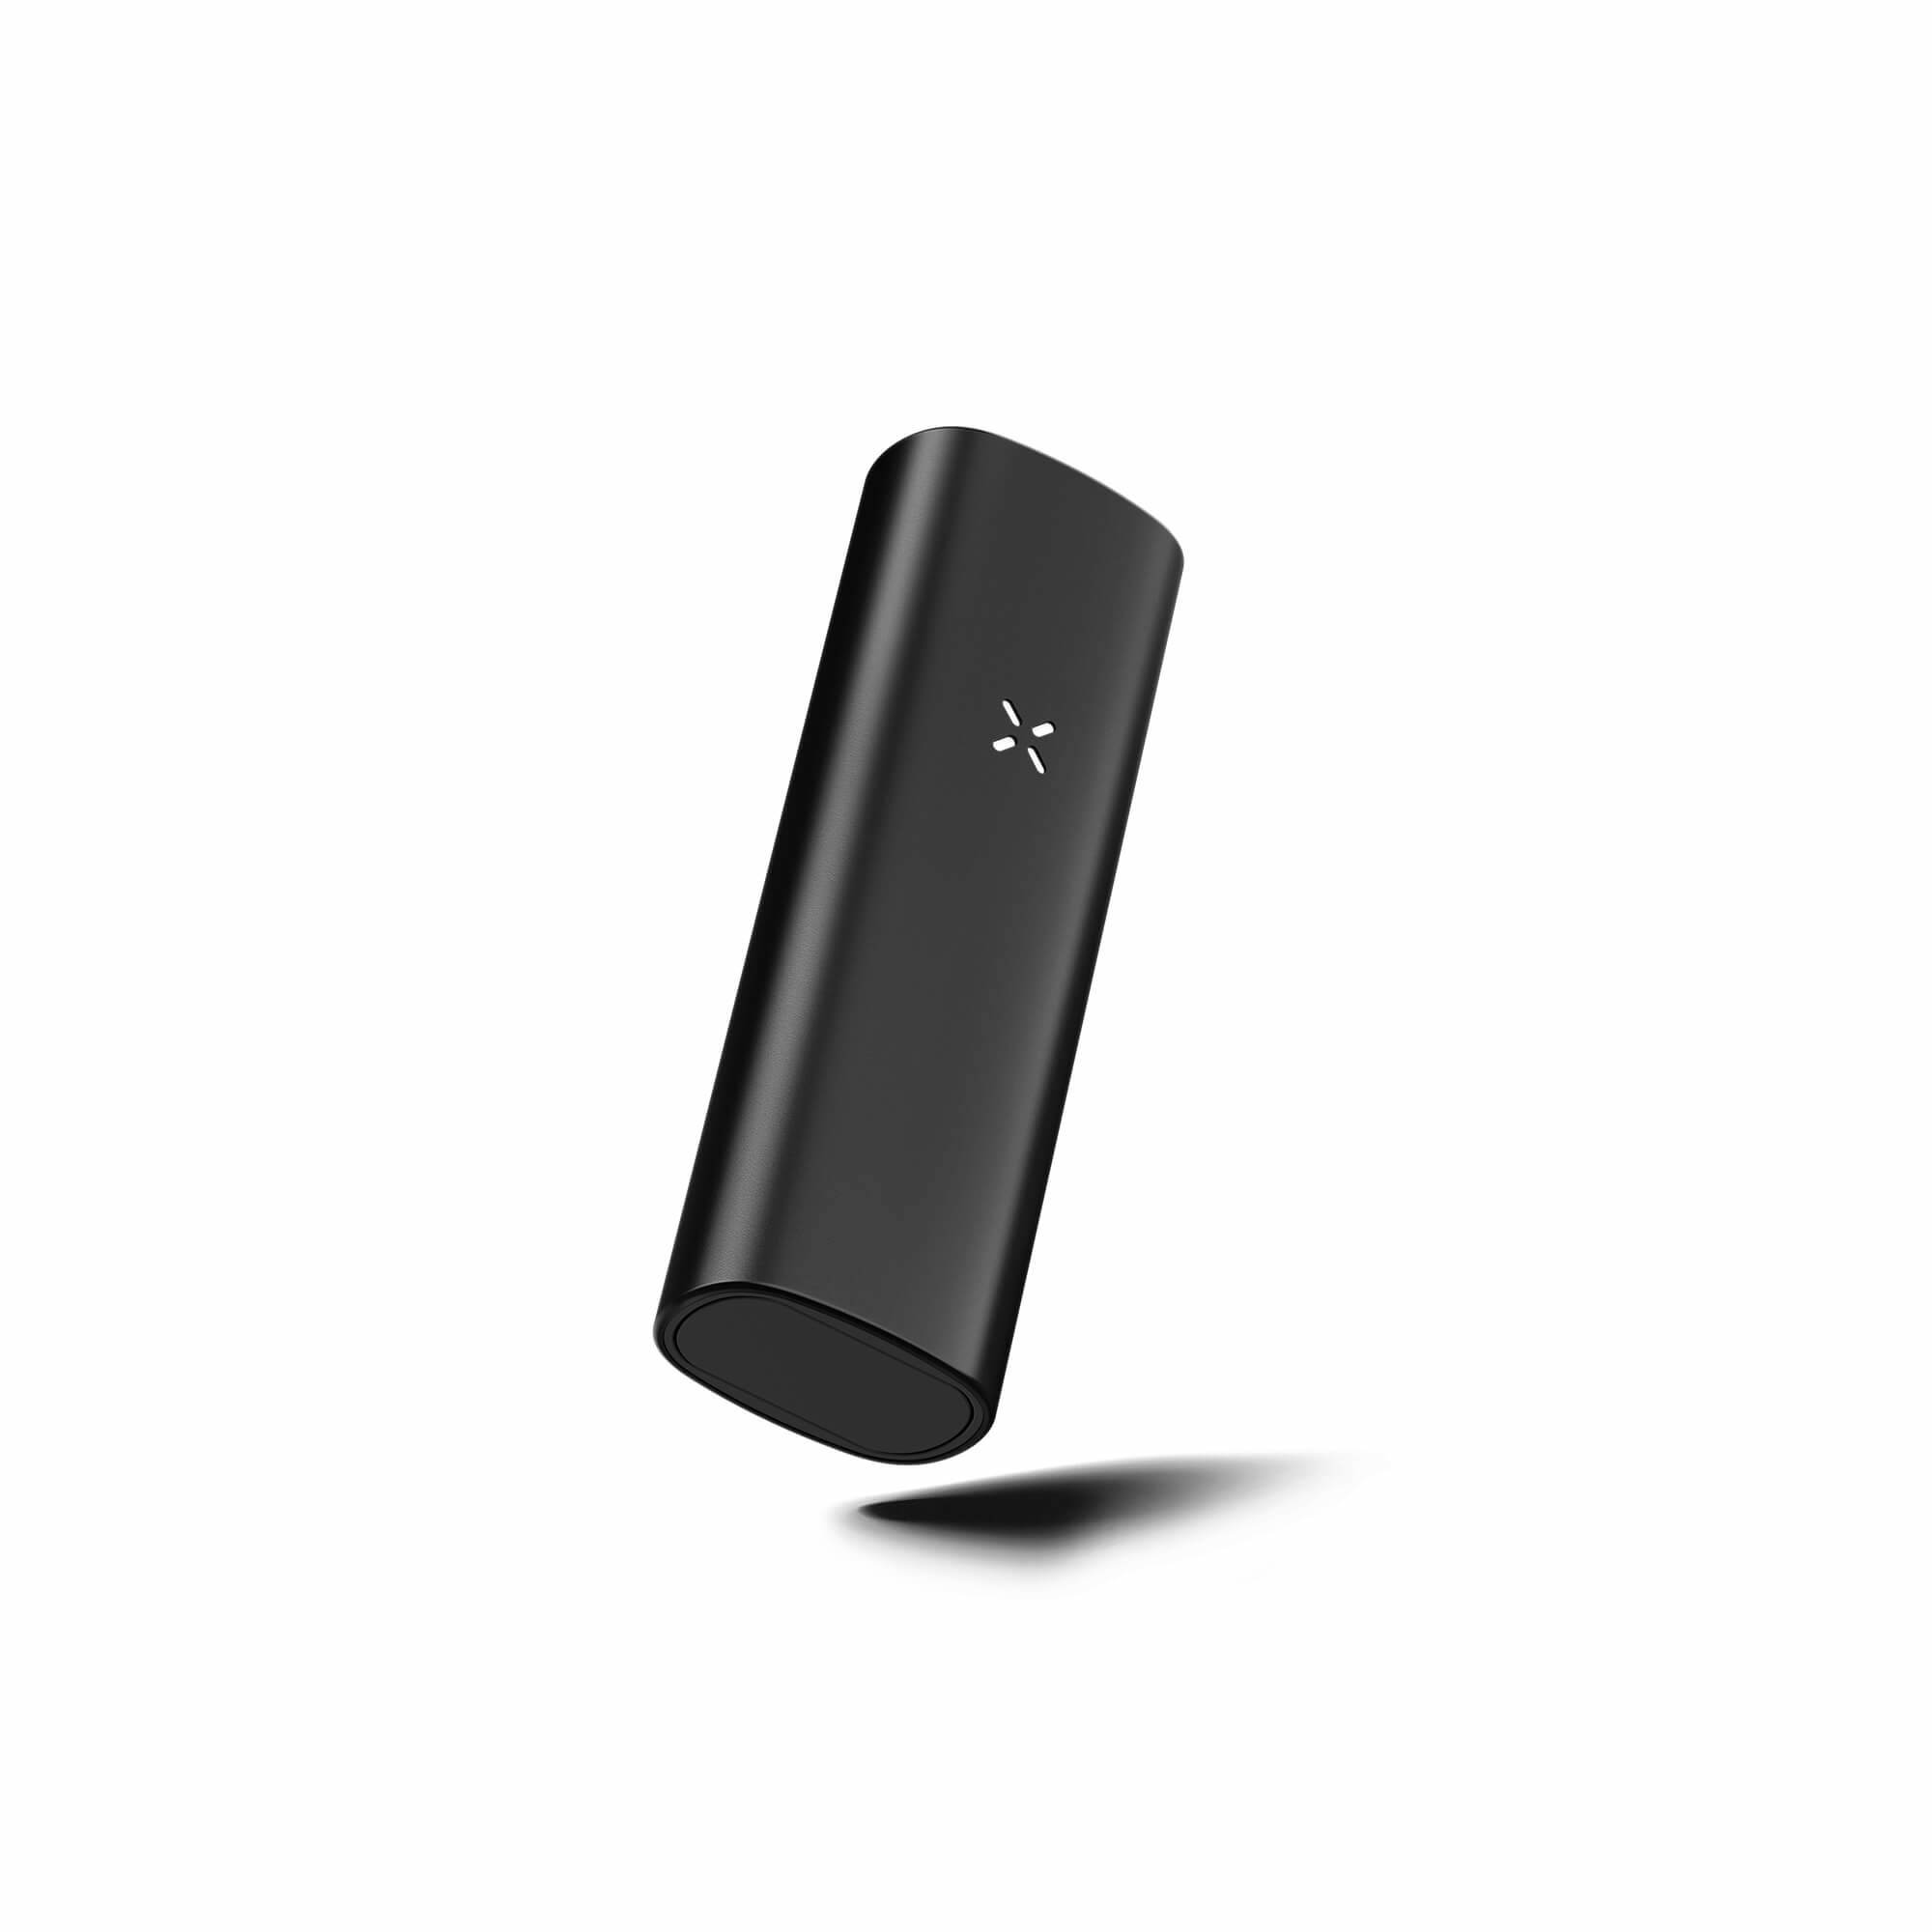 PAX 2 Vaporizer - Free Grinder & Shipping with PAX Vaporizers